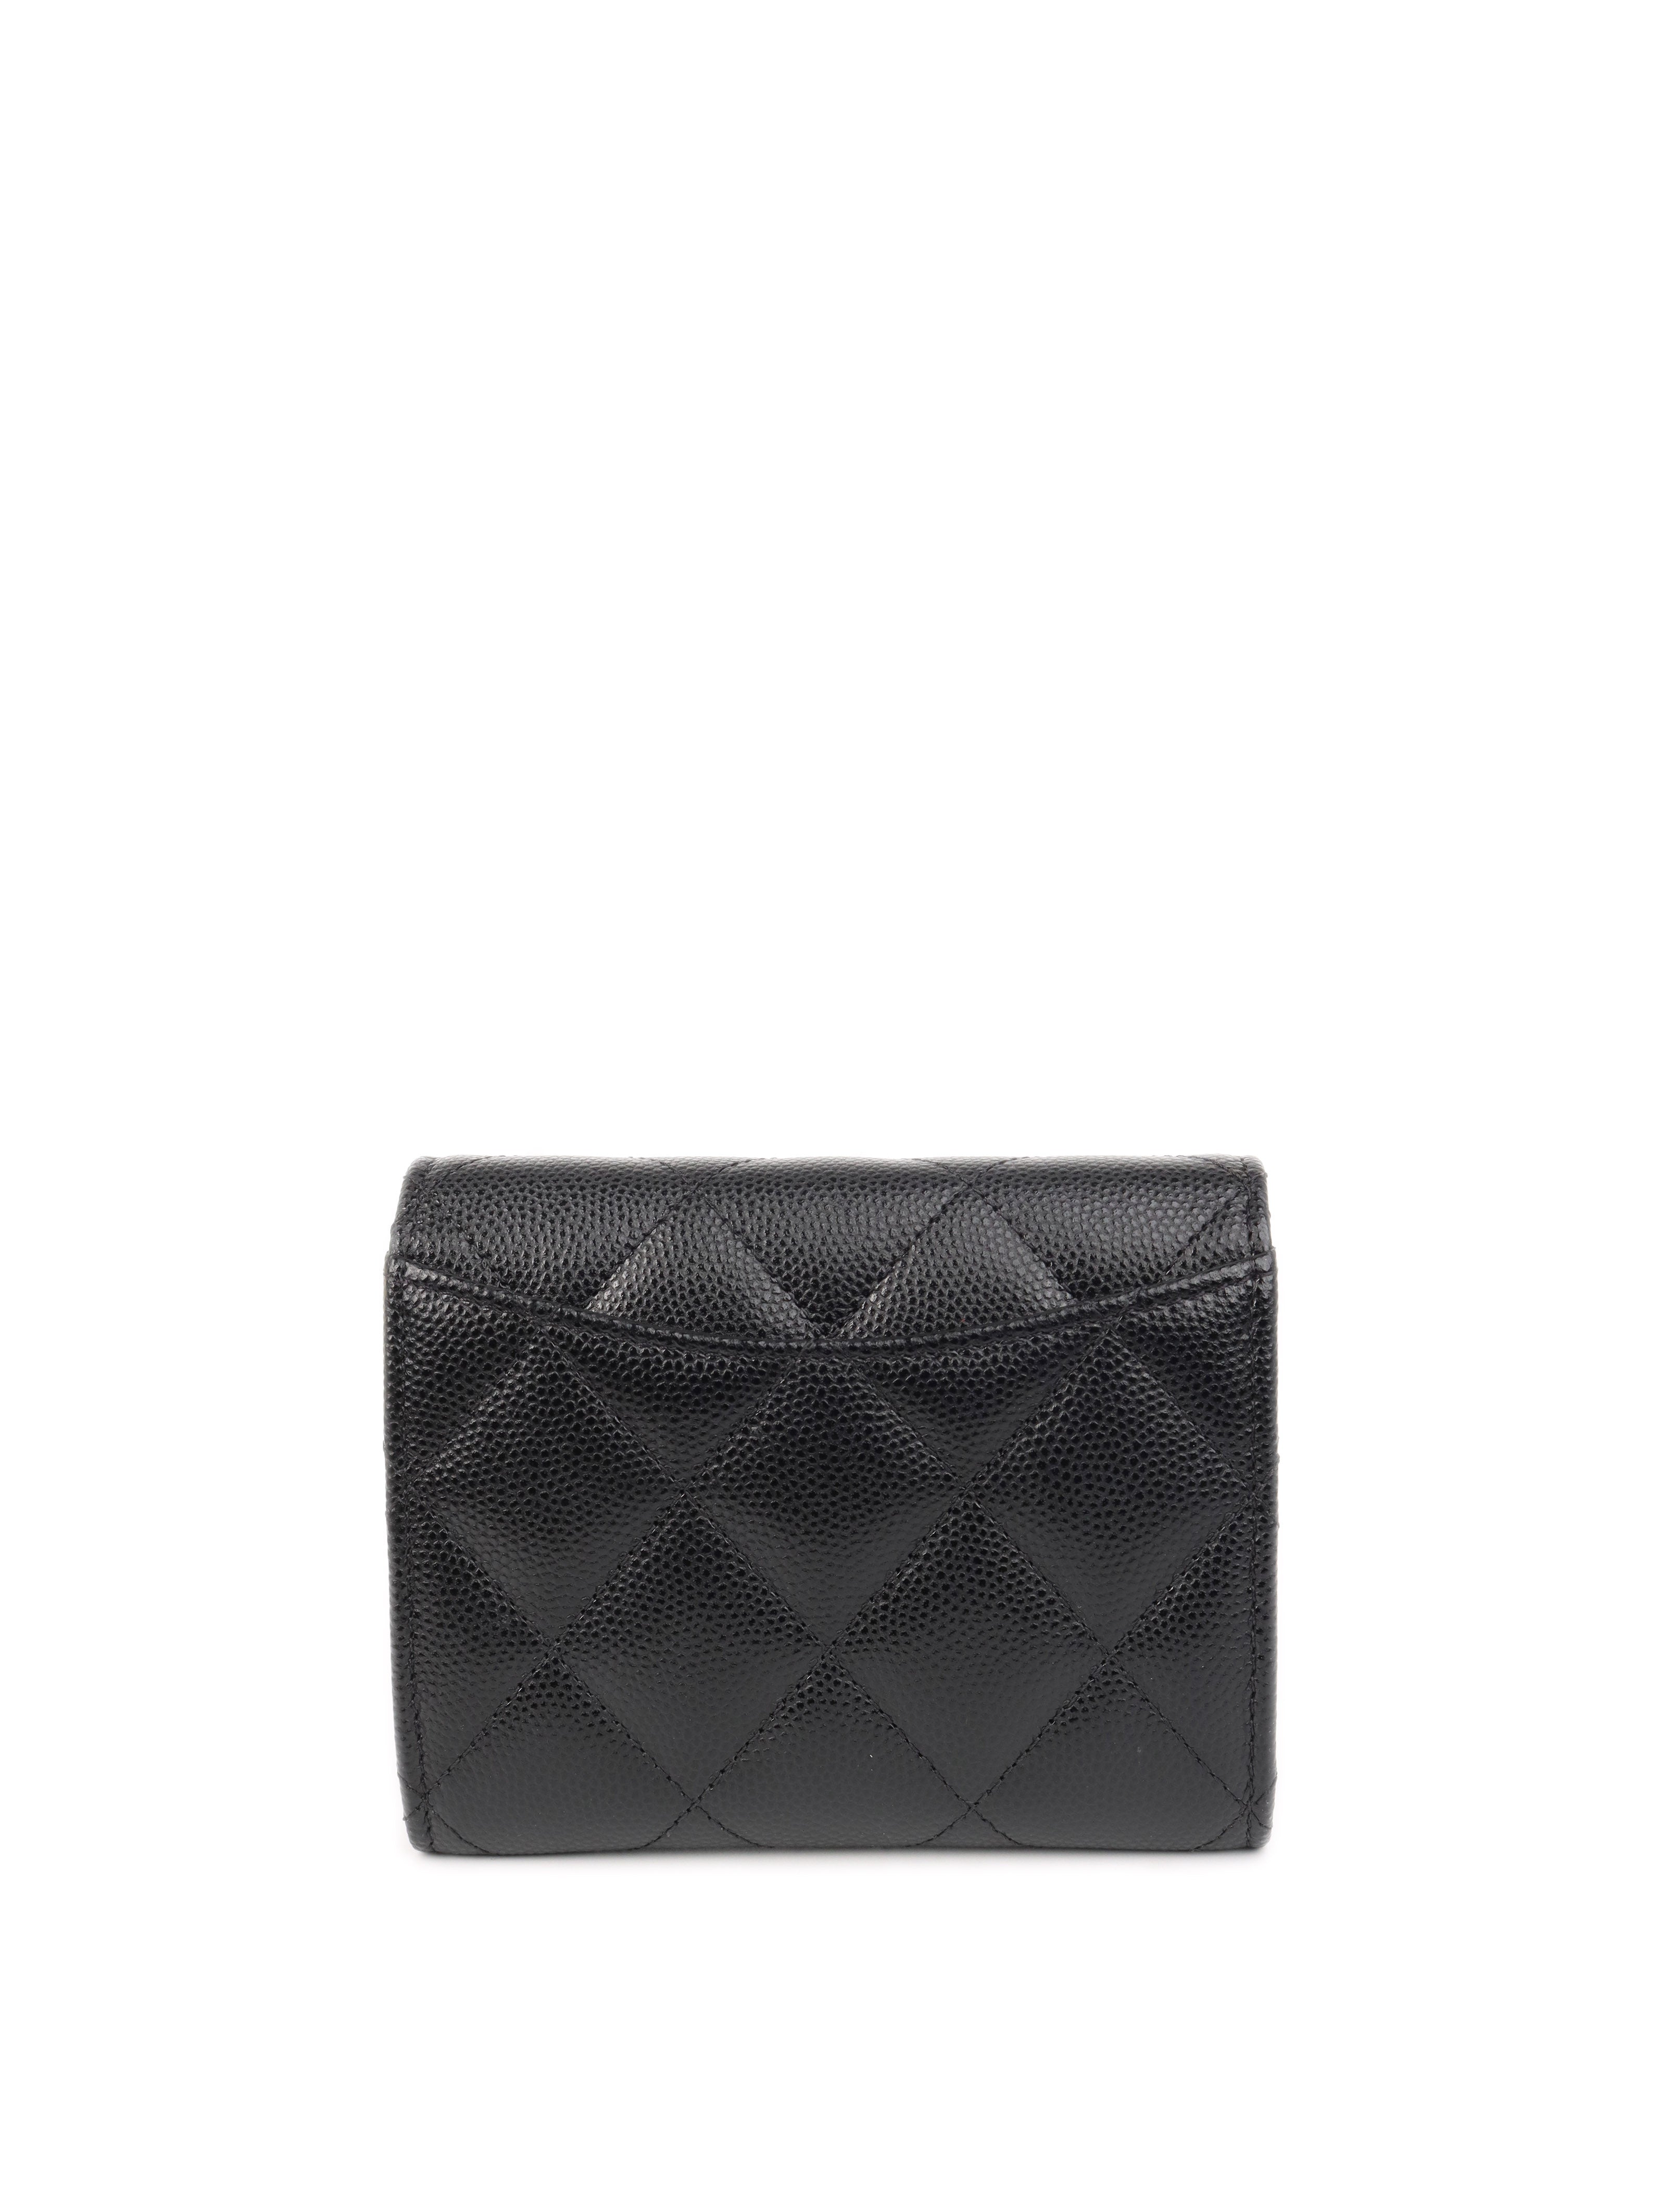 Chanel Black Caviar Card Holder with Chain  Votre Luxe